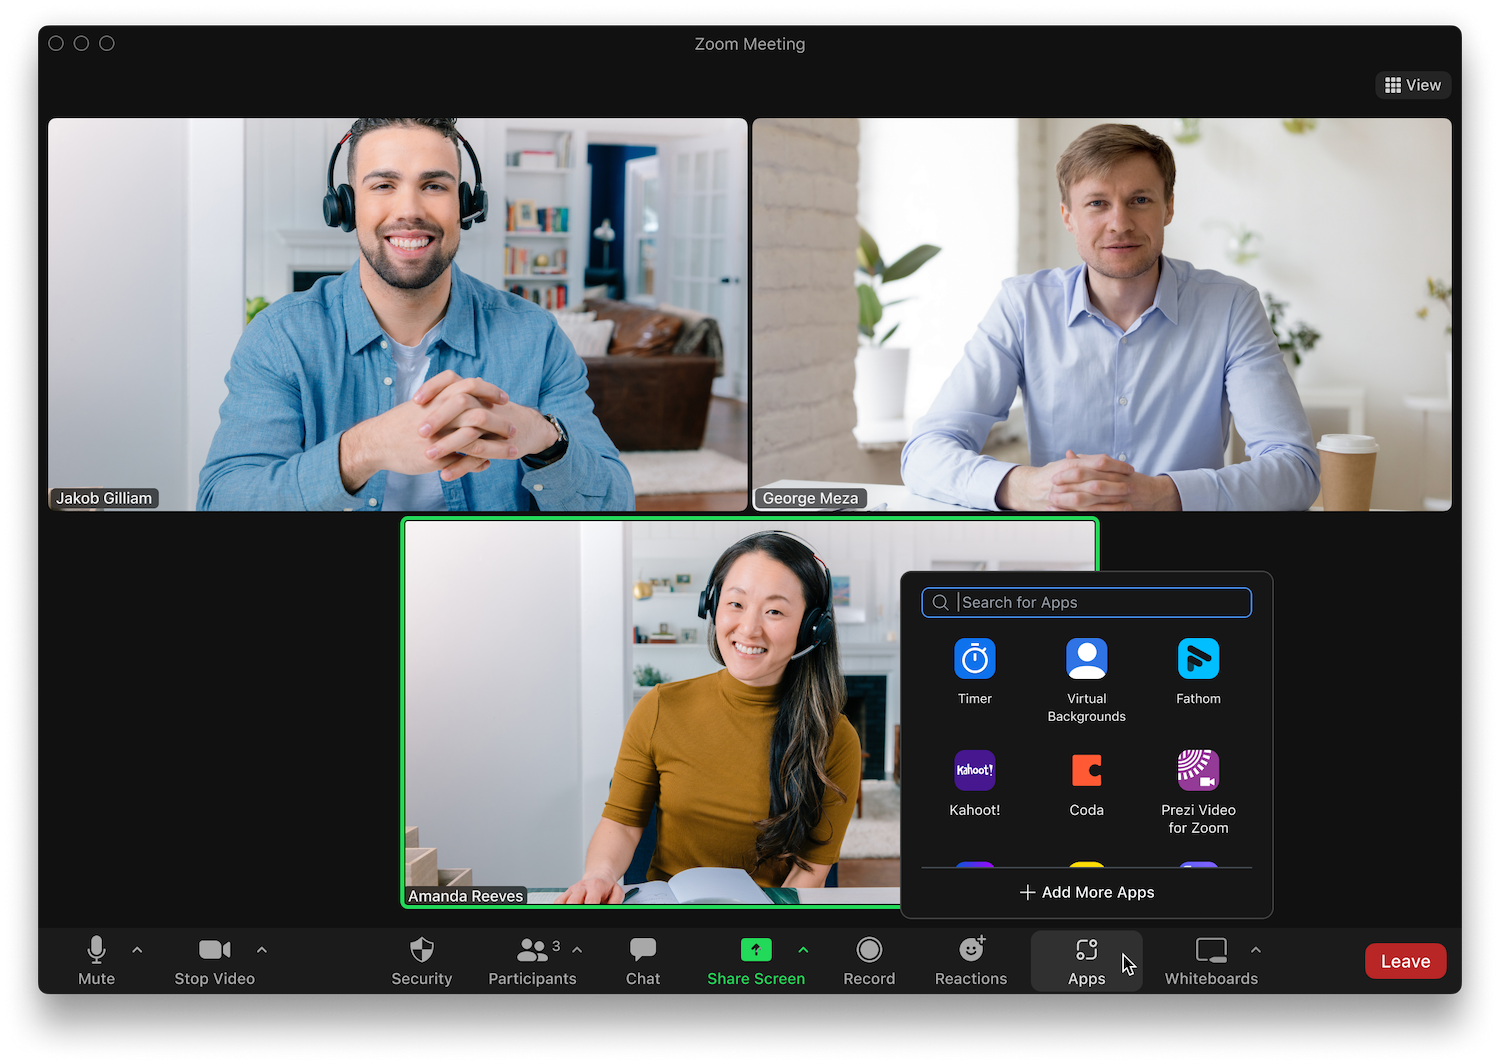 Take your meetings to the next level with Zoom-curated Essential Apps